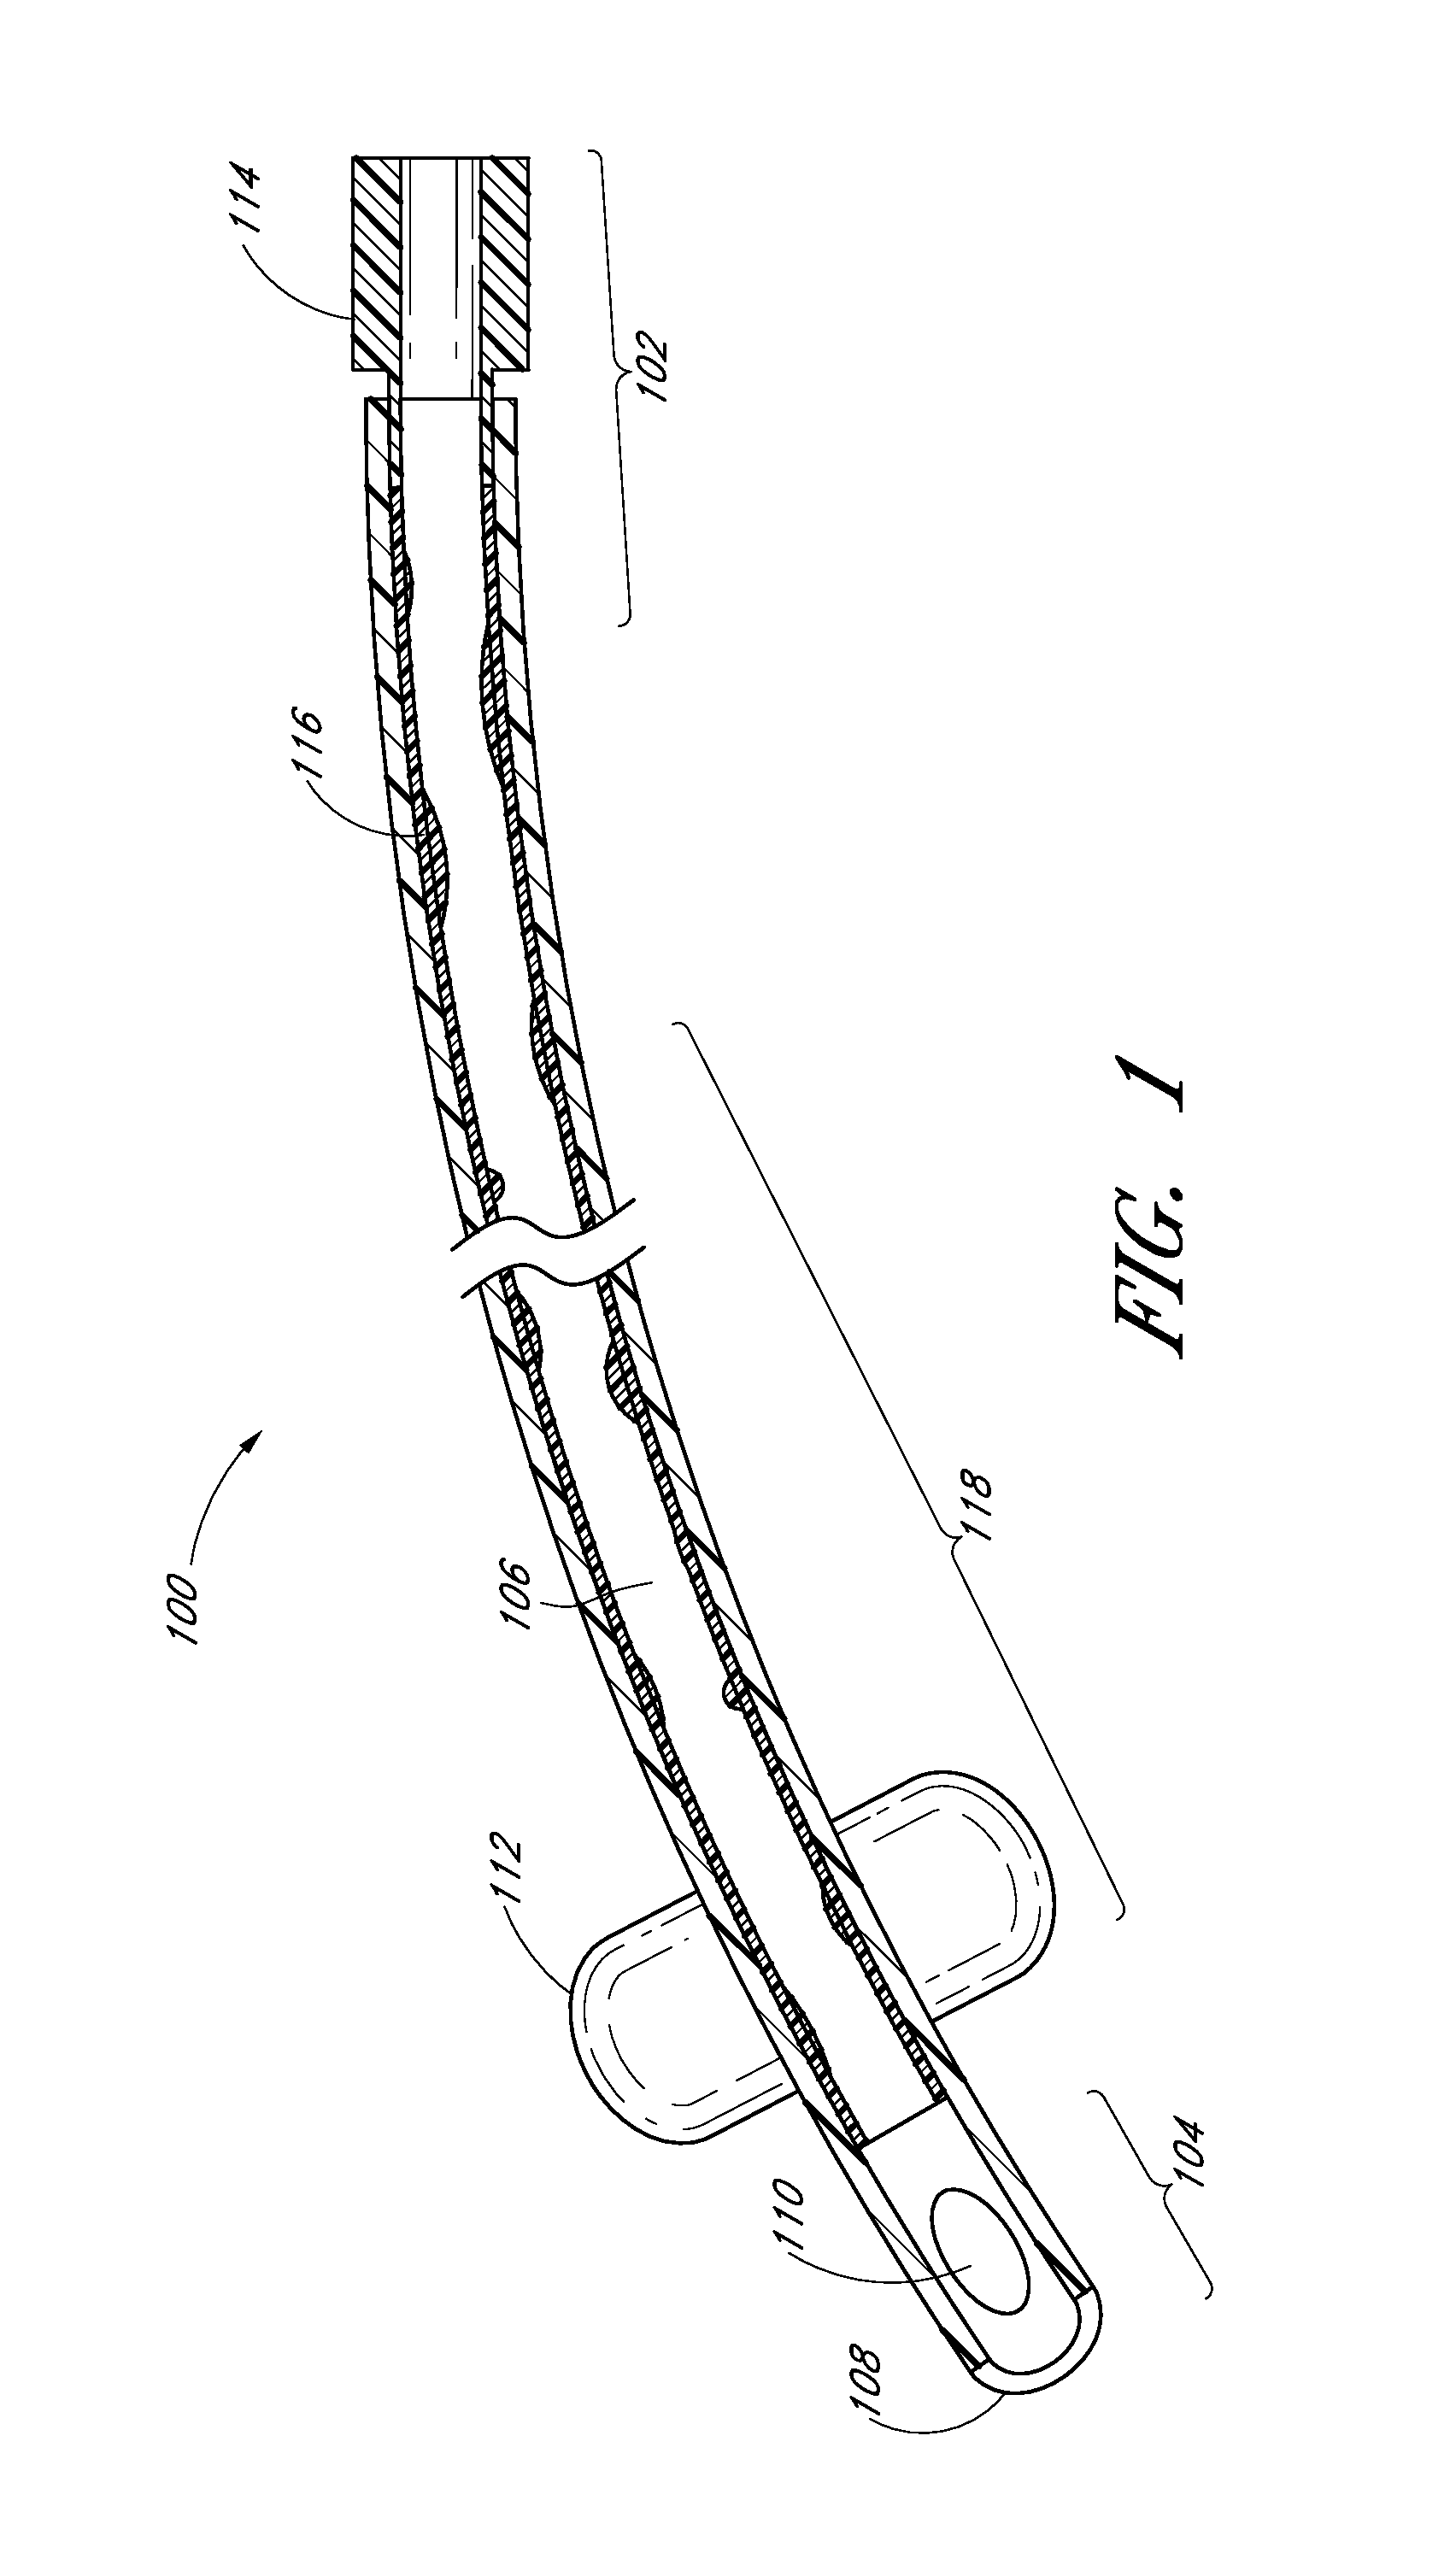 Mechanically-actuated endotracheal tube cleaning device